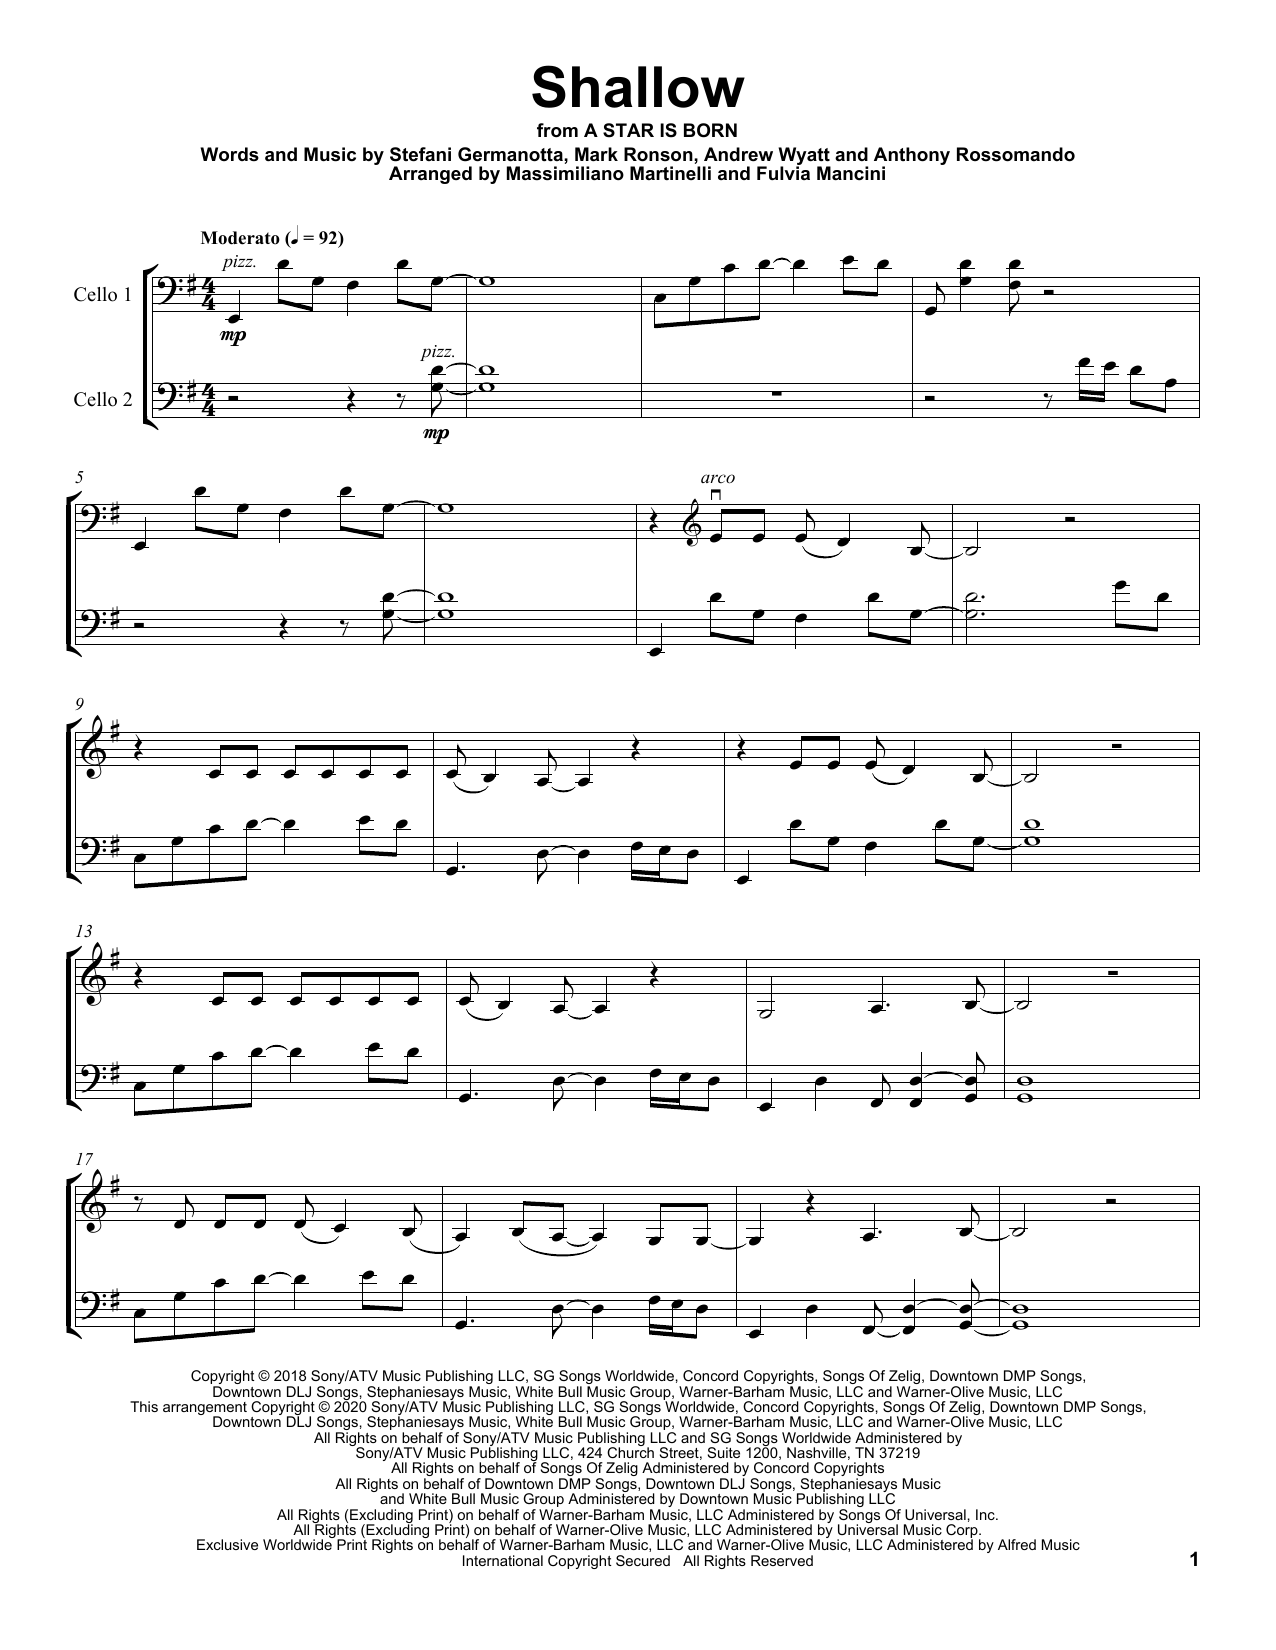 Download Mr. & Mrs. Cello Shallow (from A Star Is Born) Sheet Music